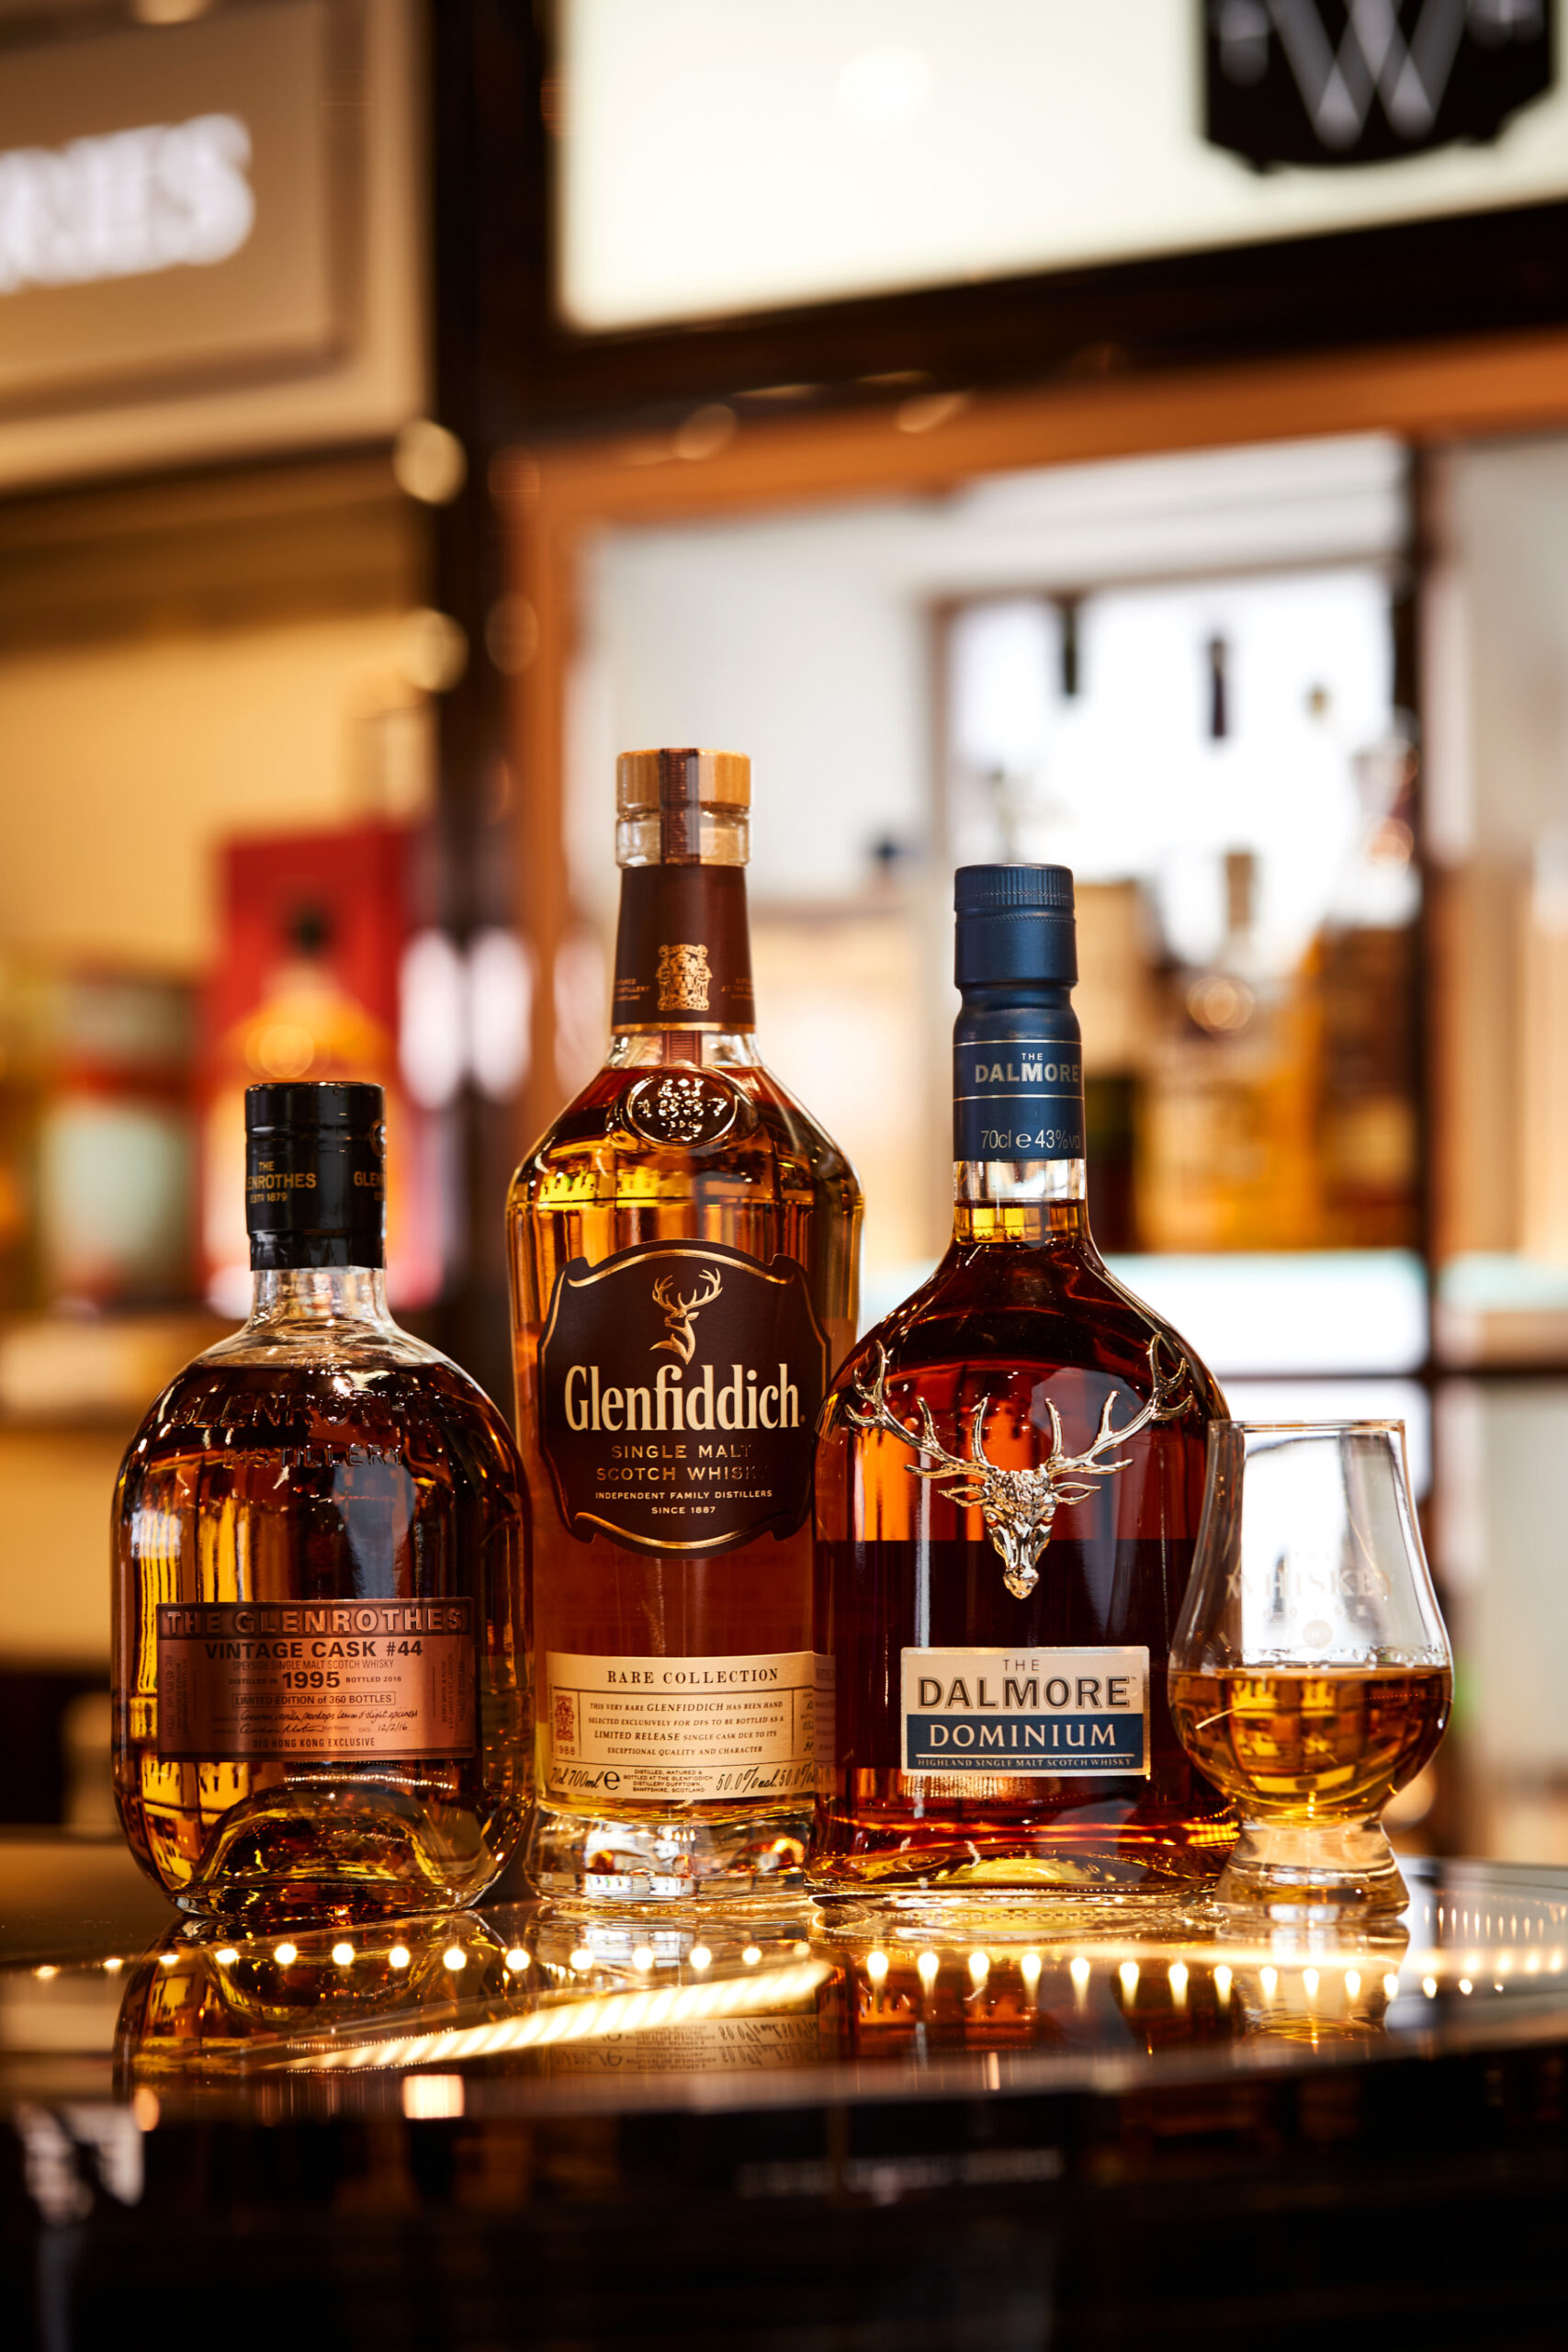 visitors-are-invited-to-experience-the-whiskey-houses-expansive-collection-first-hand-with-complimentary-samplings-of-the-more-than-40-whiskeys-available-for-tasting-daily